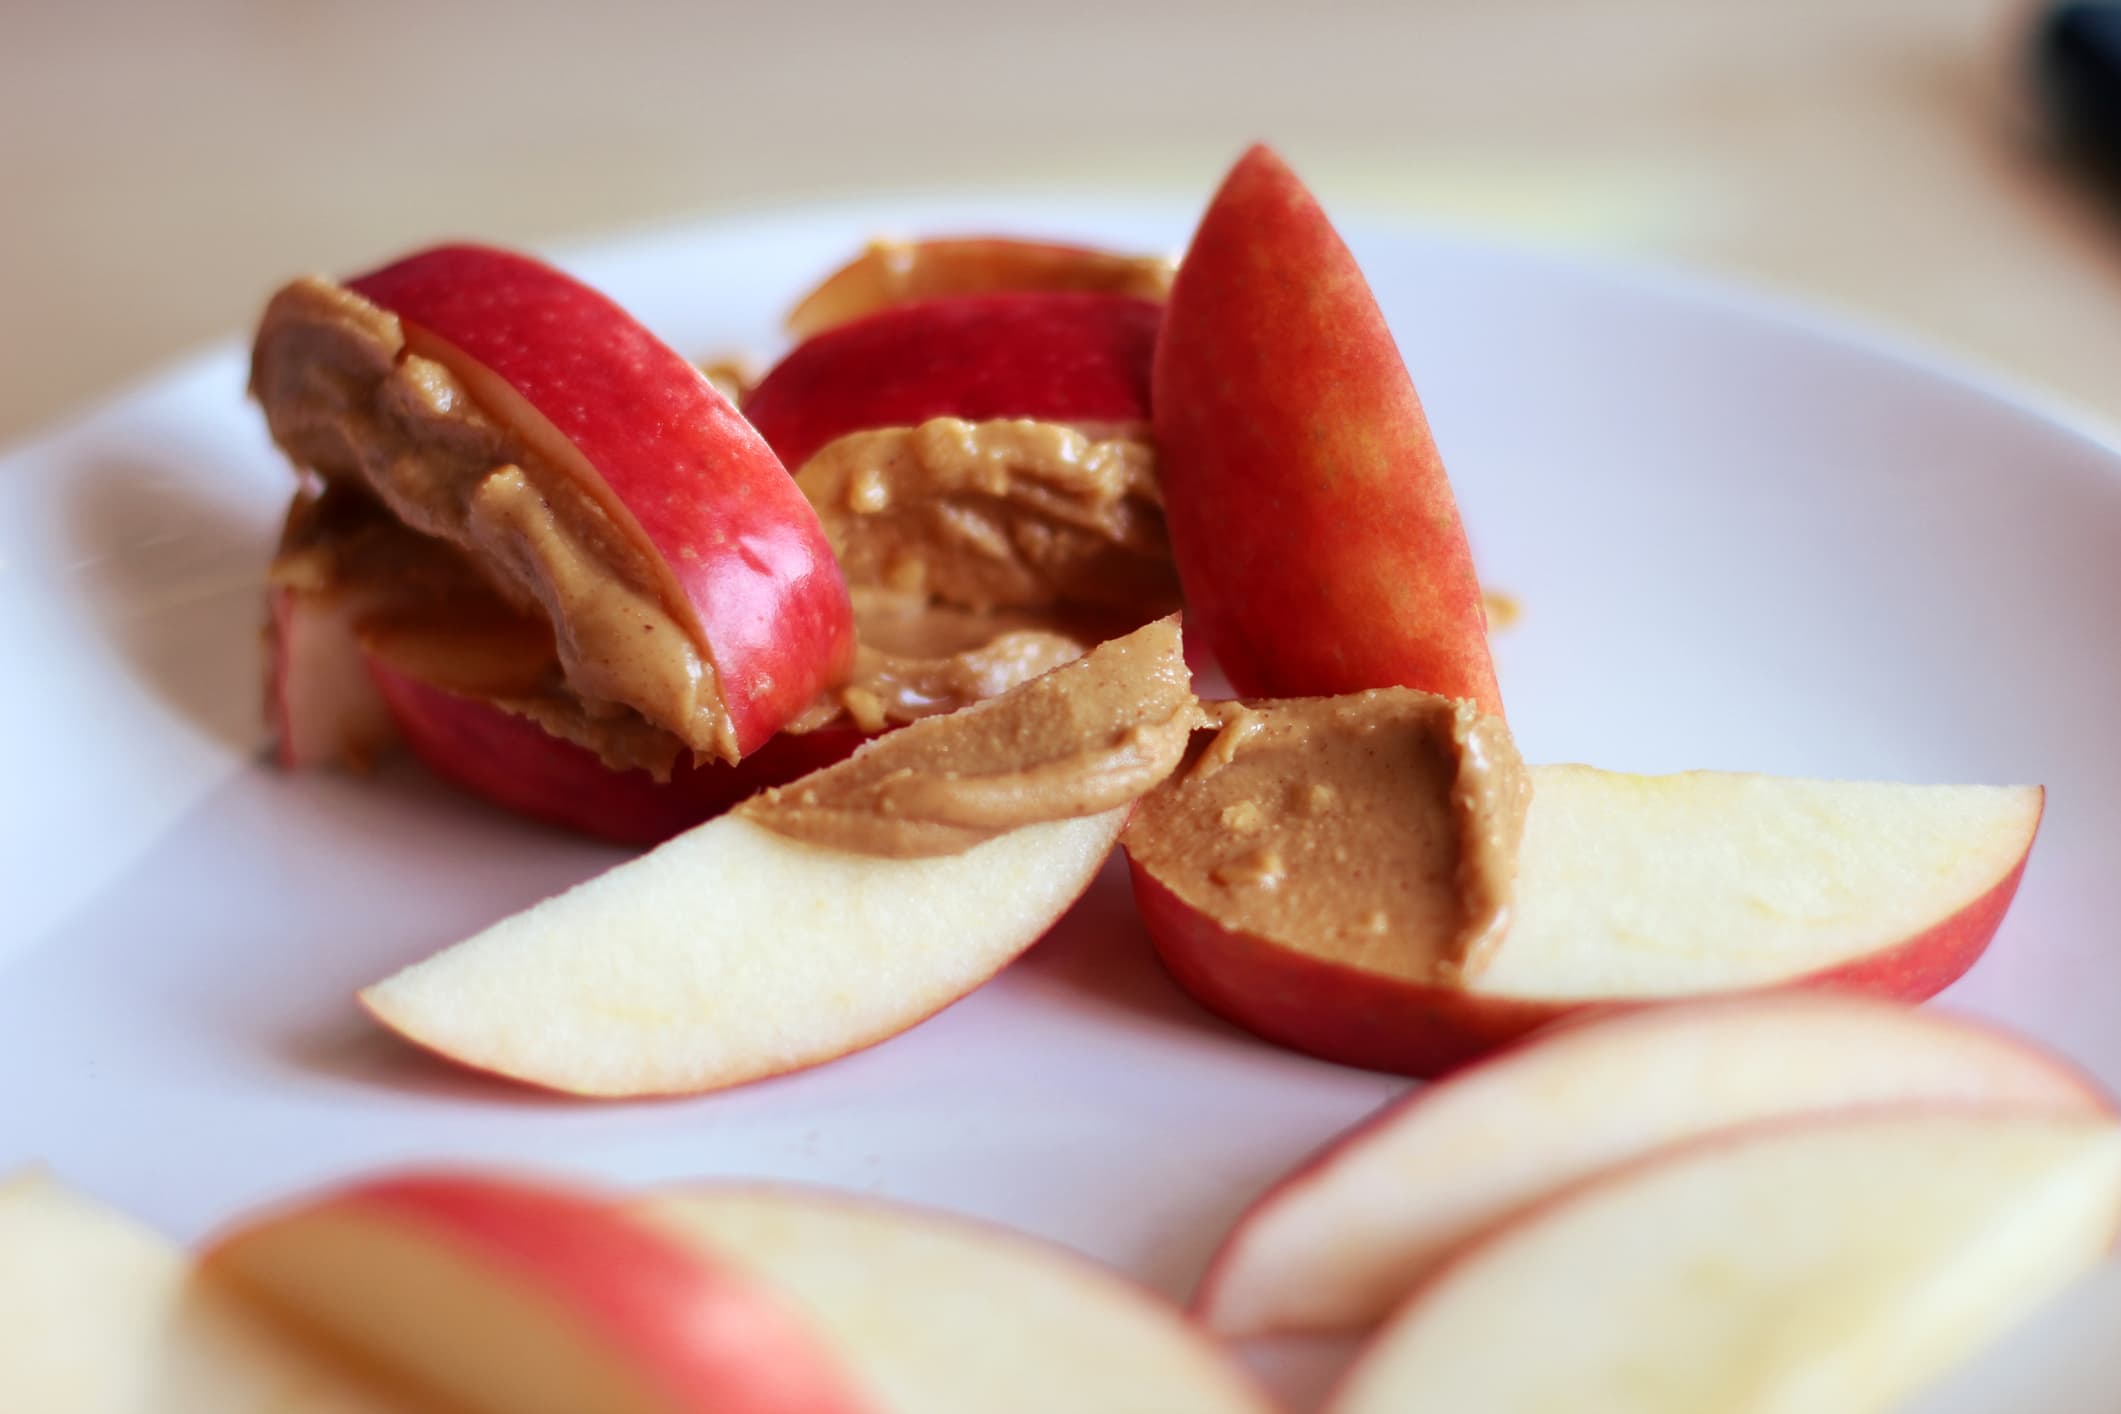 Sliced red apple with crunchy peanut butter spread on top. Served on a white plate with a pale background.